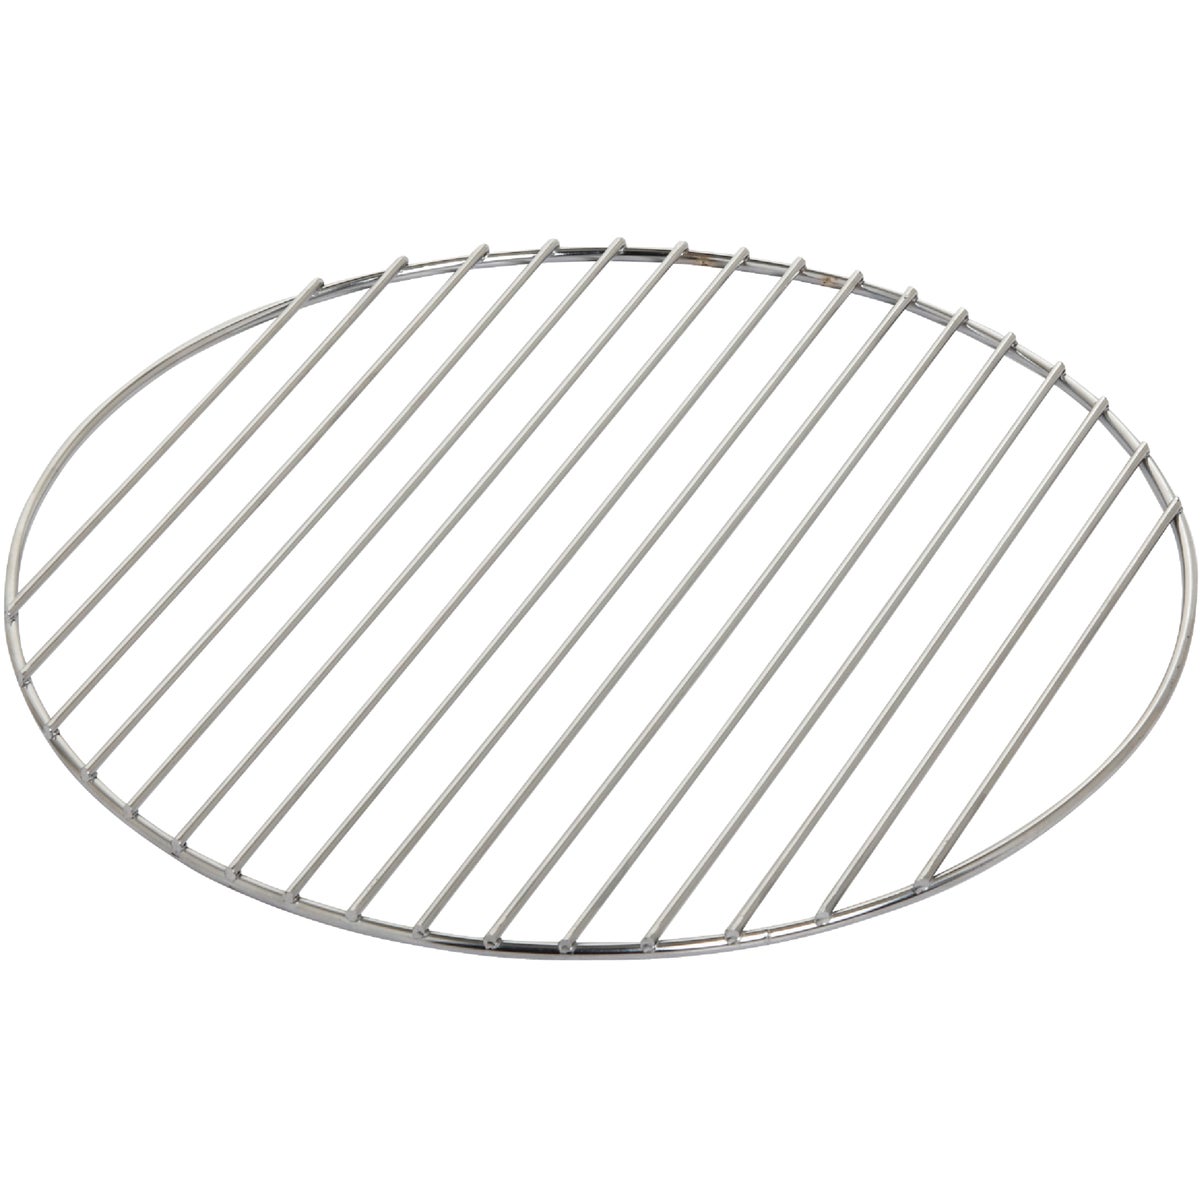 Old Smokey 12.9 In. Aluminized Steel Top Grill Grate